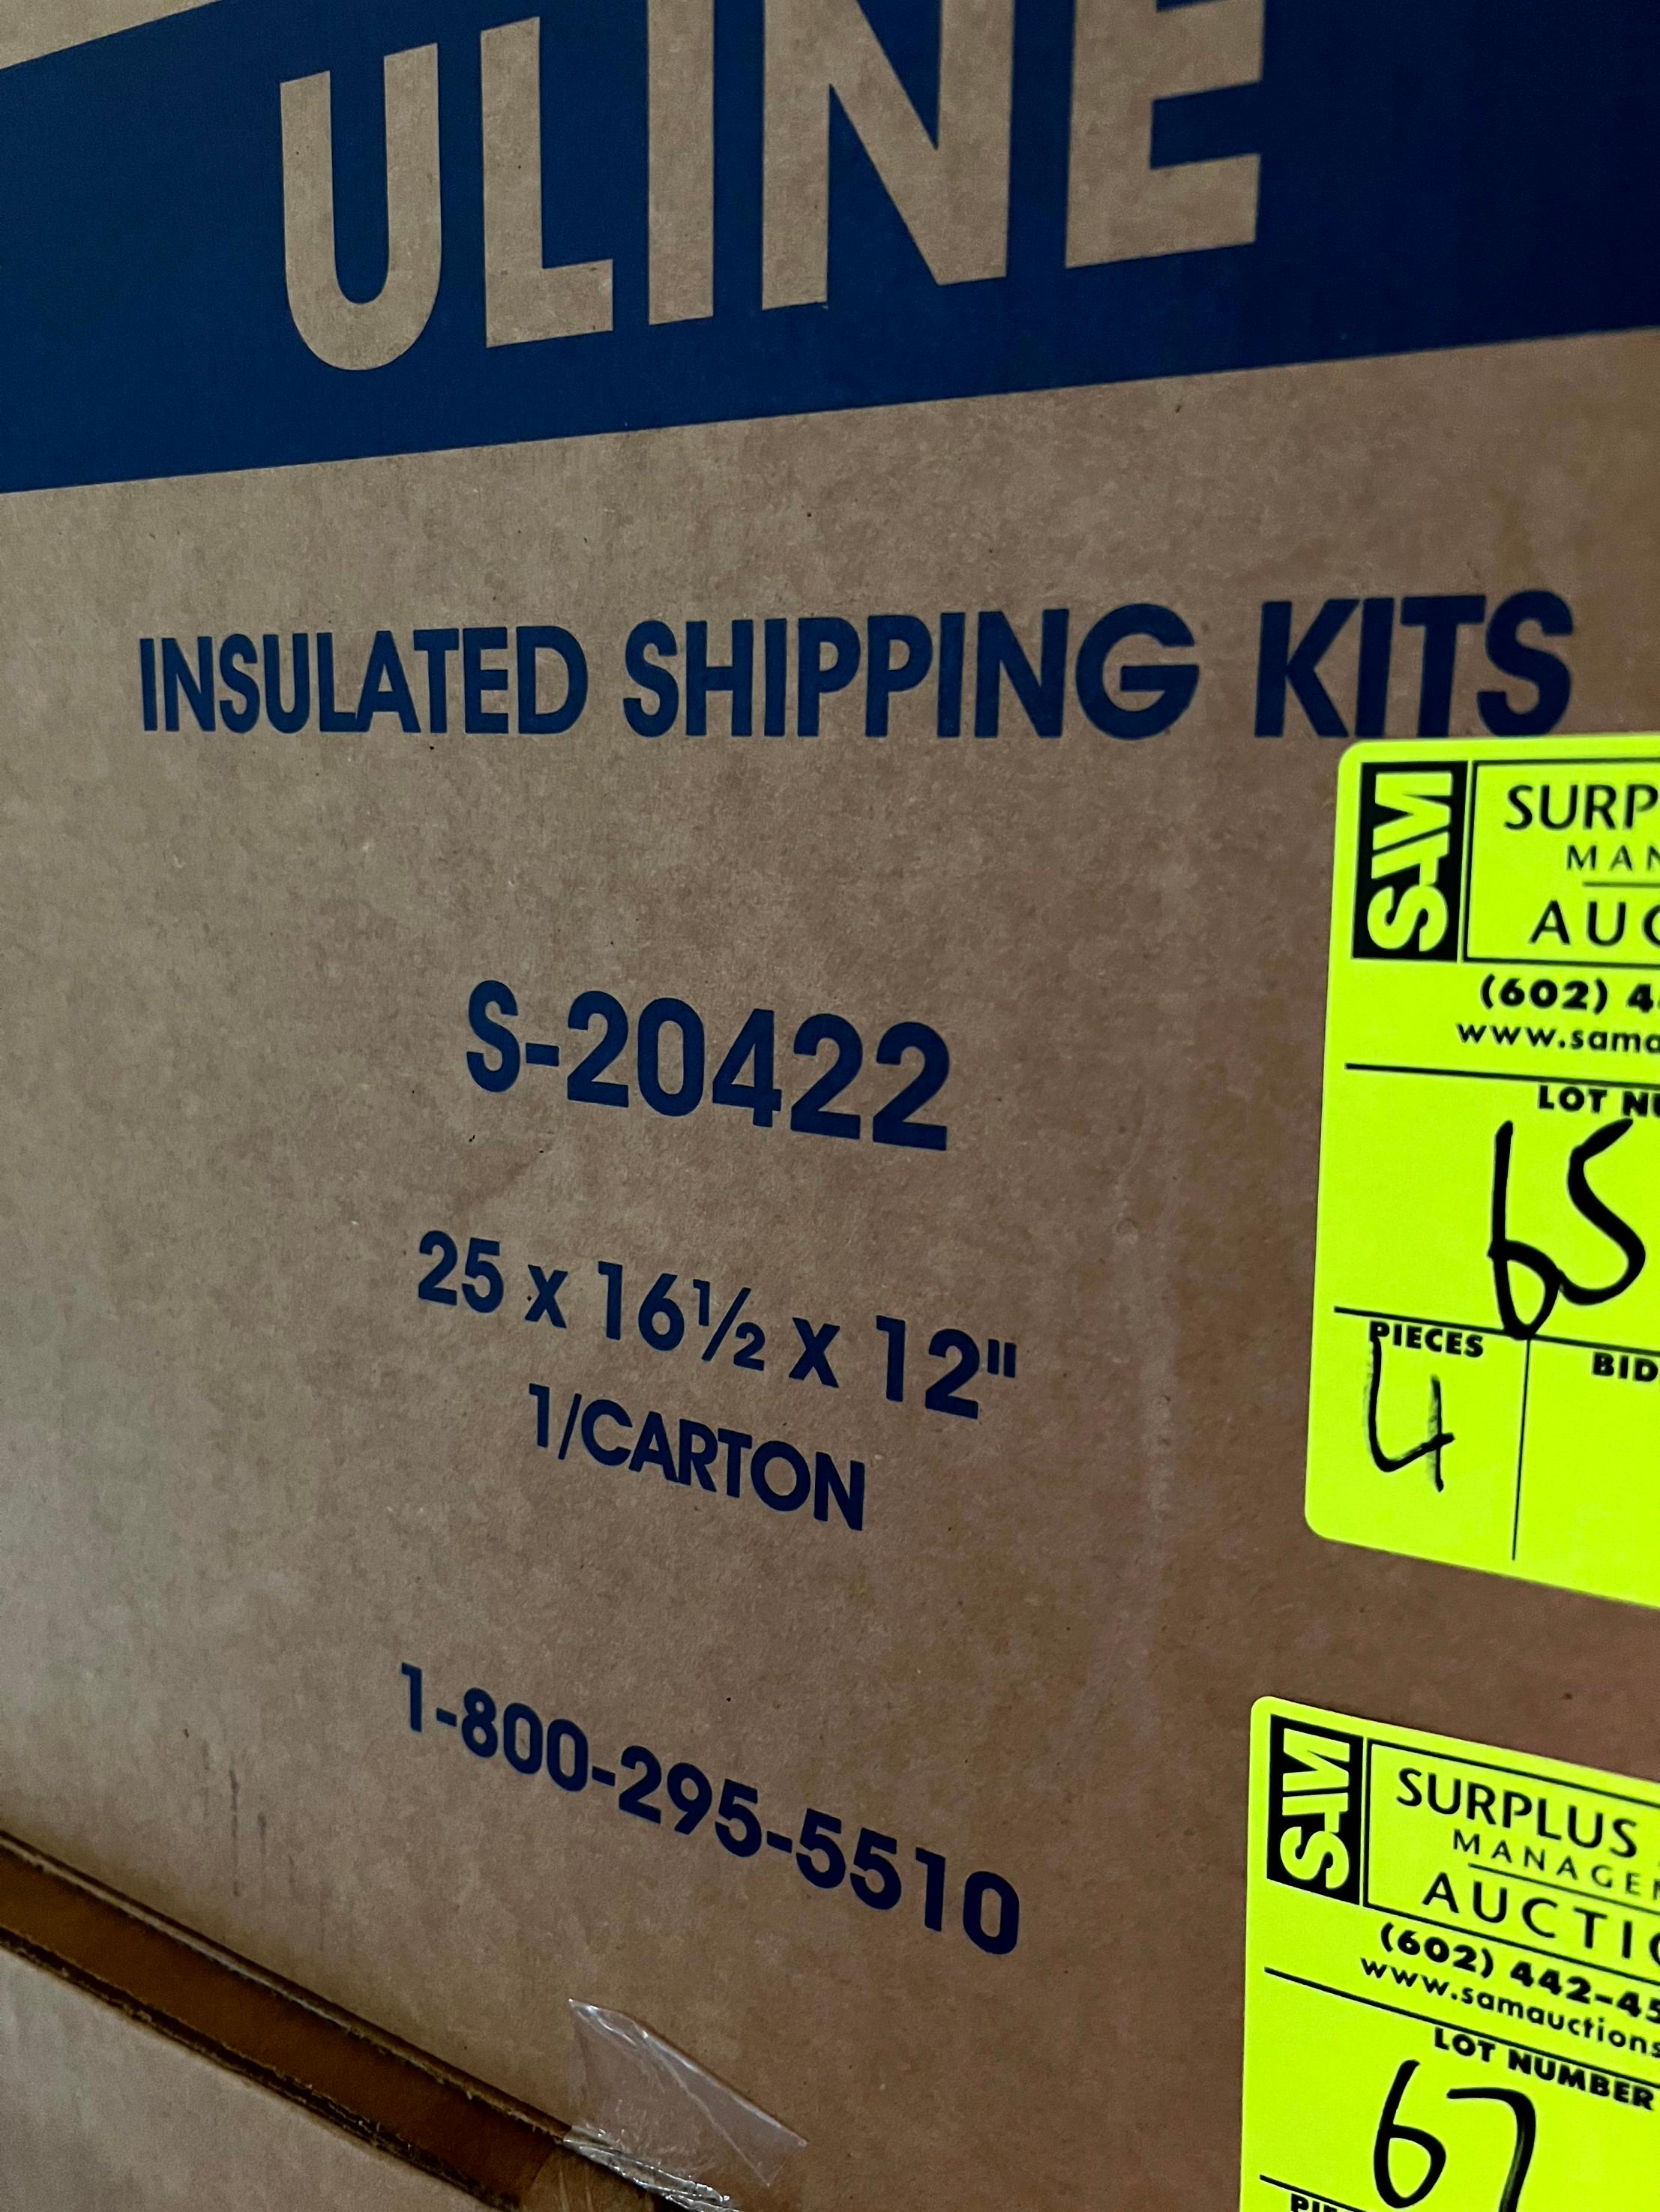 NEW In Box U-Line Insulated Shipping Kits